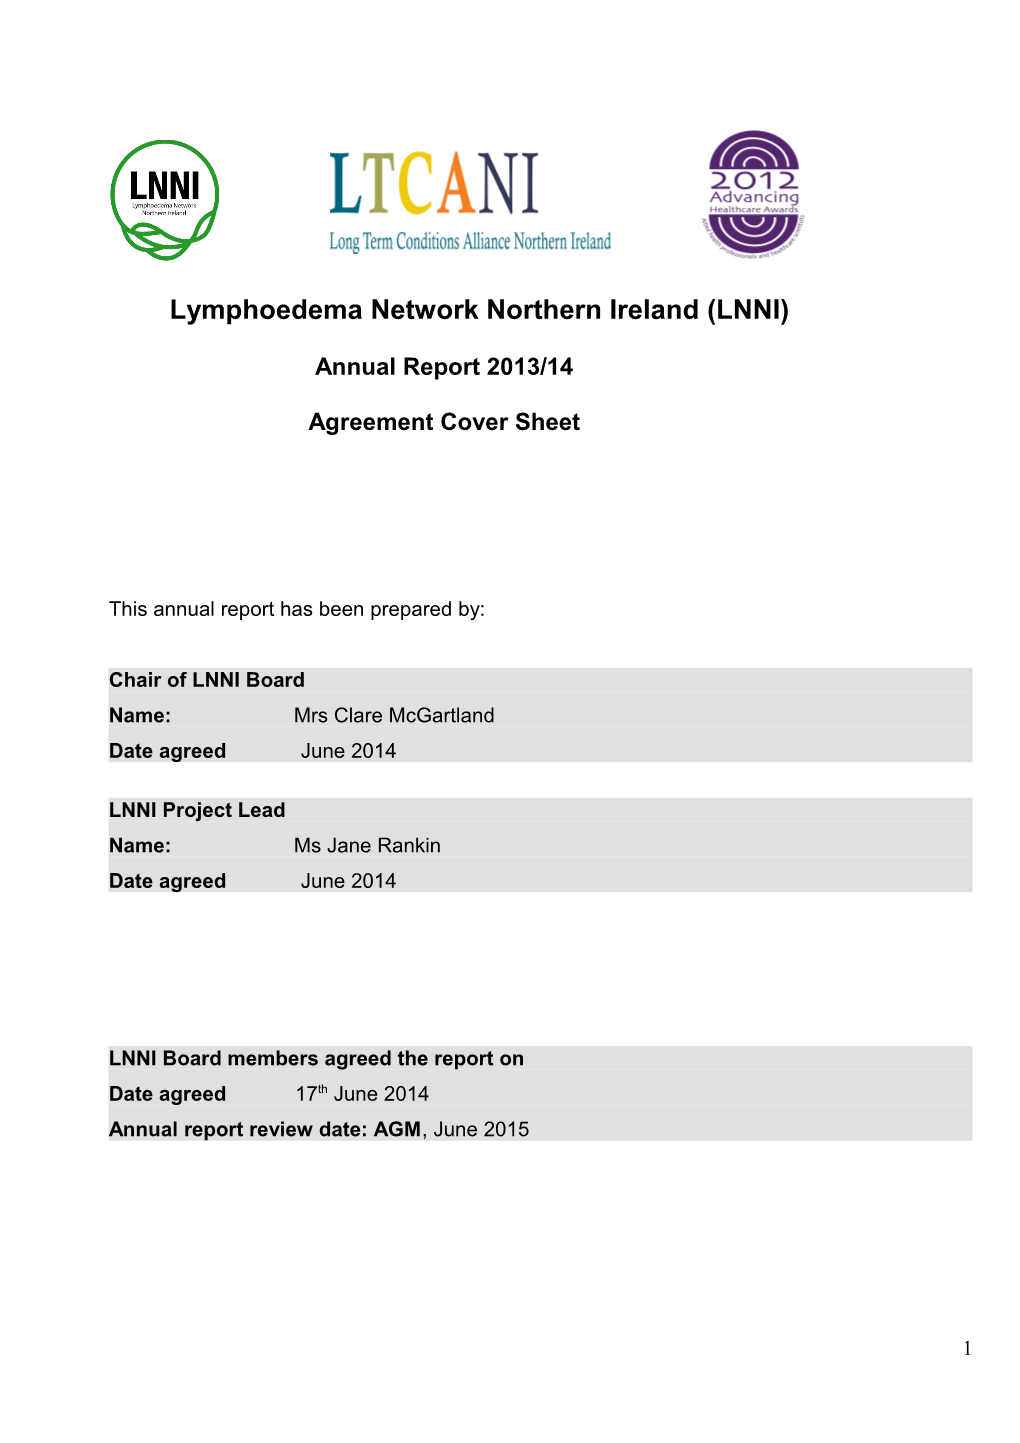 Nican Regional Colorectal Cancer Group Annual Report 2008/09